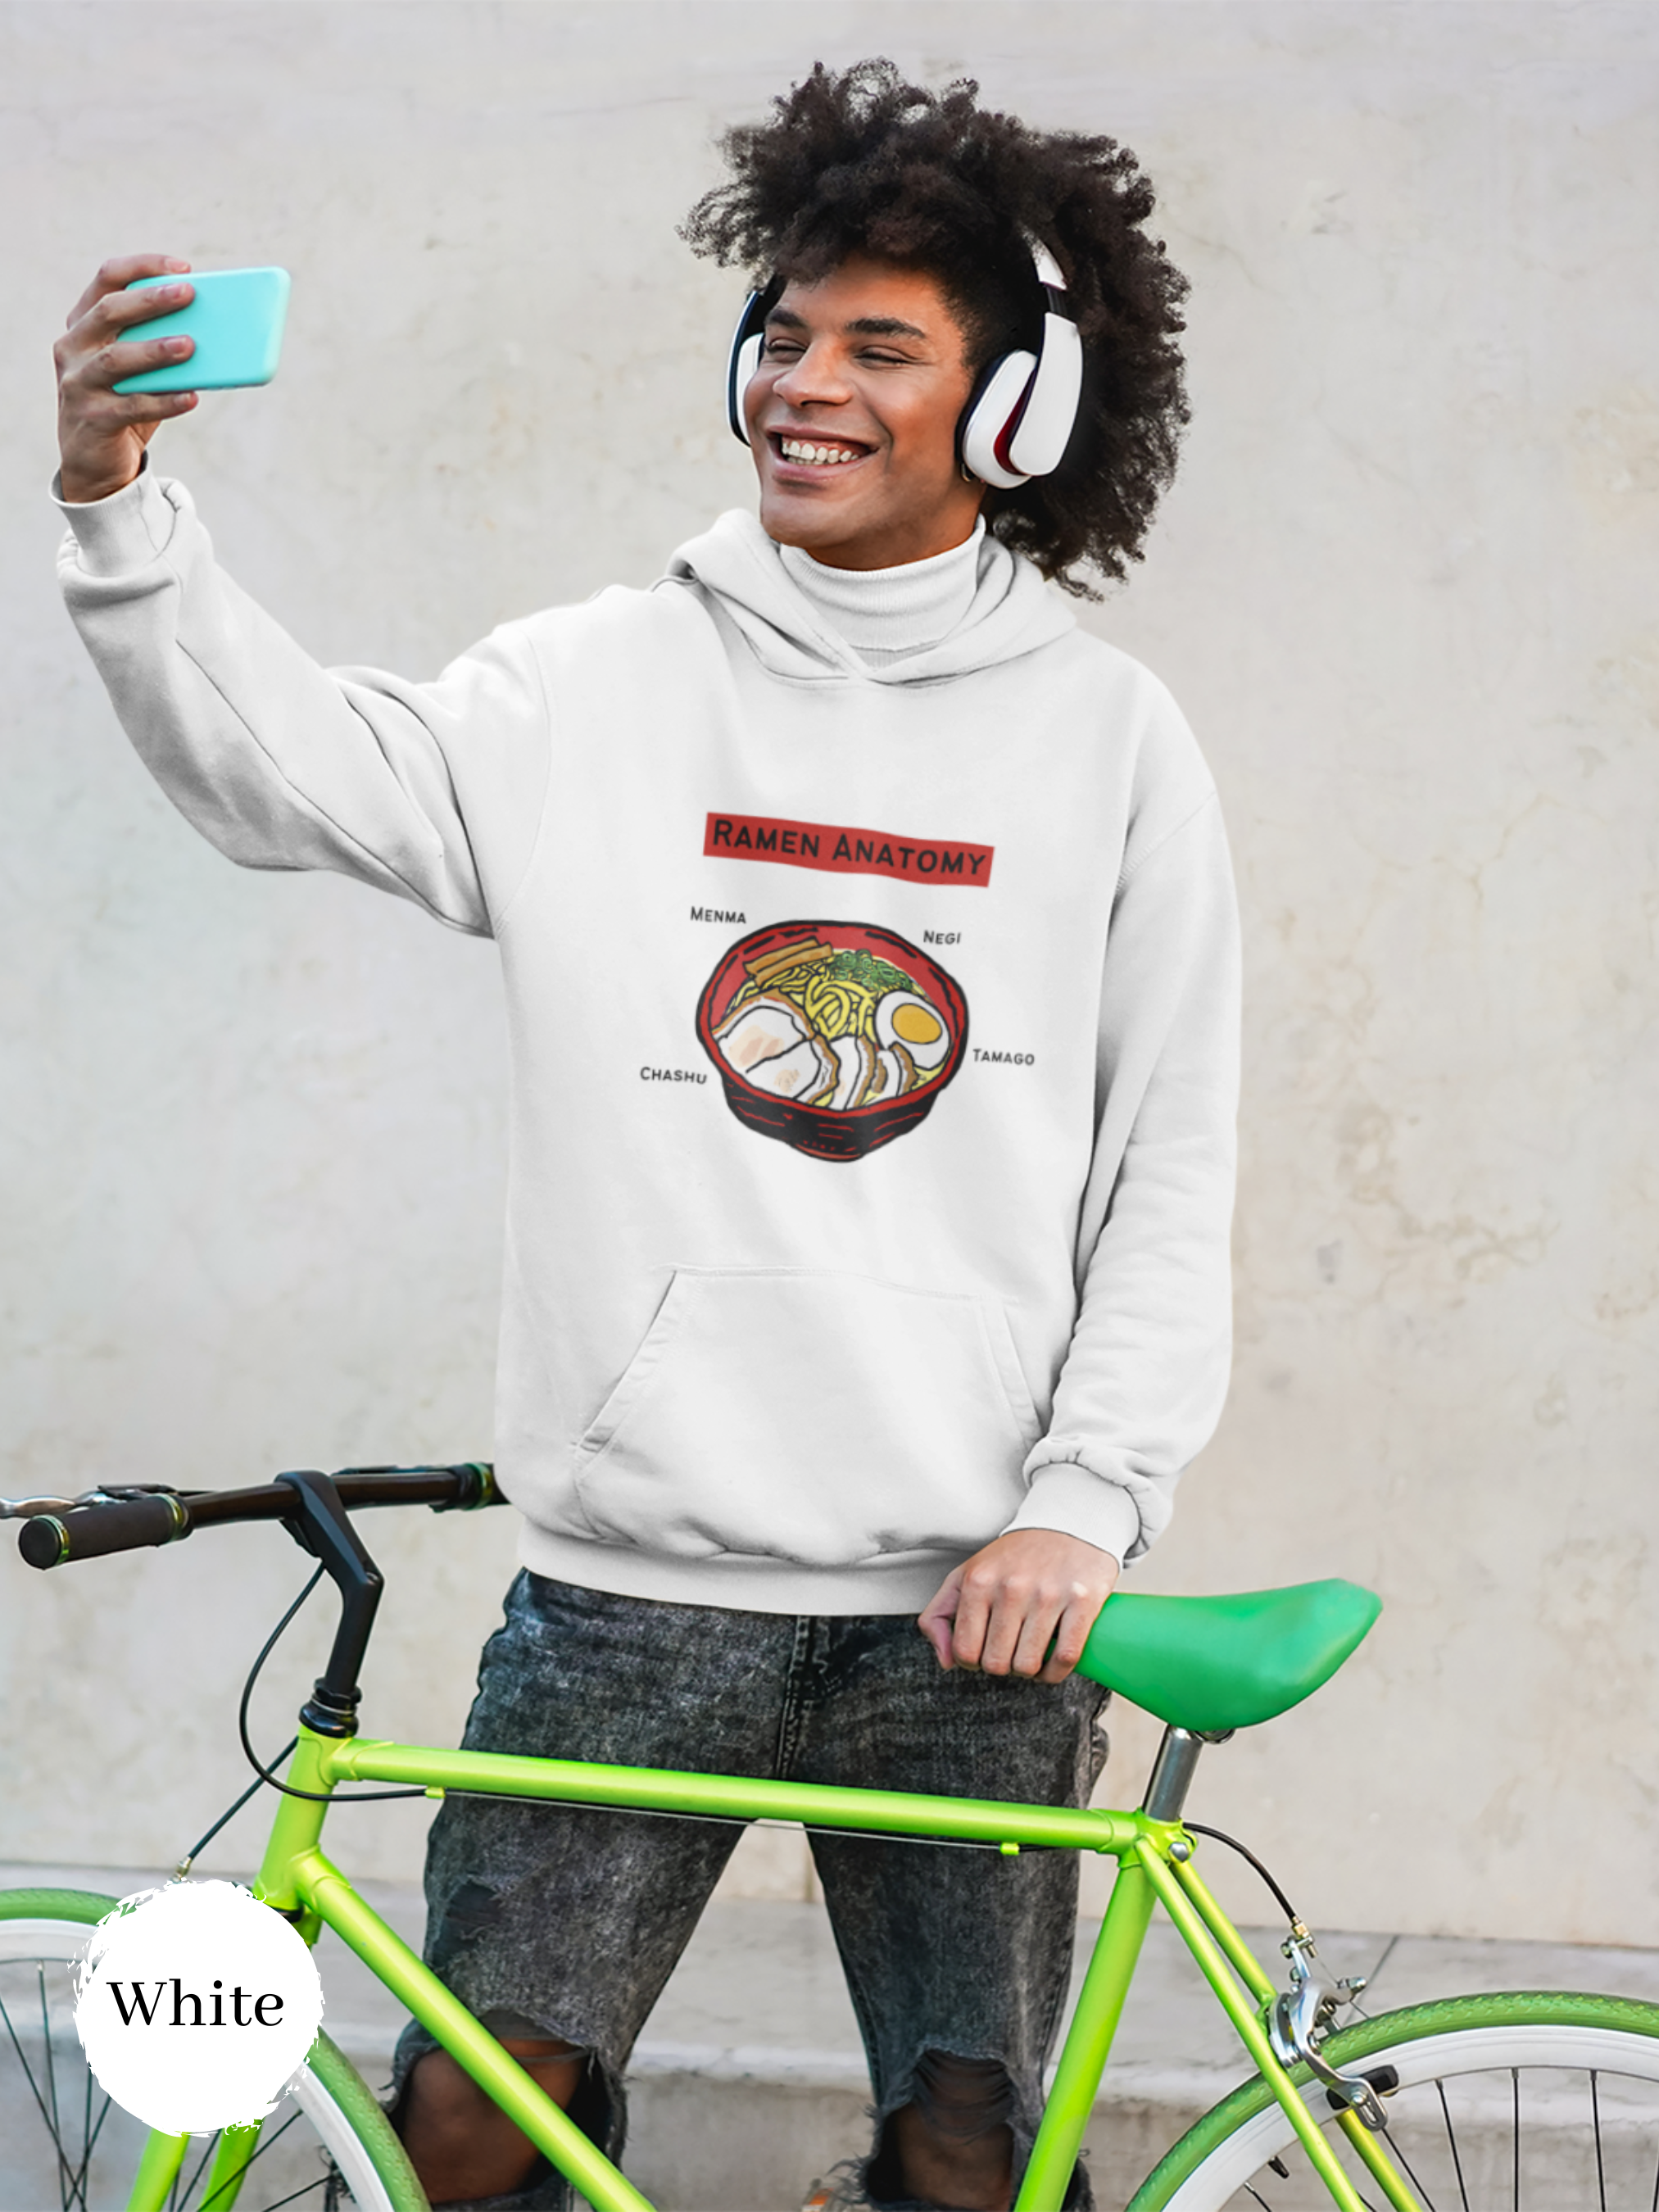 Ramen Hoodie: Ramen Anatomy - Wear Your Love for Ramen Toppings with This Awesome Hoodie